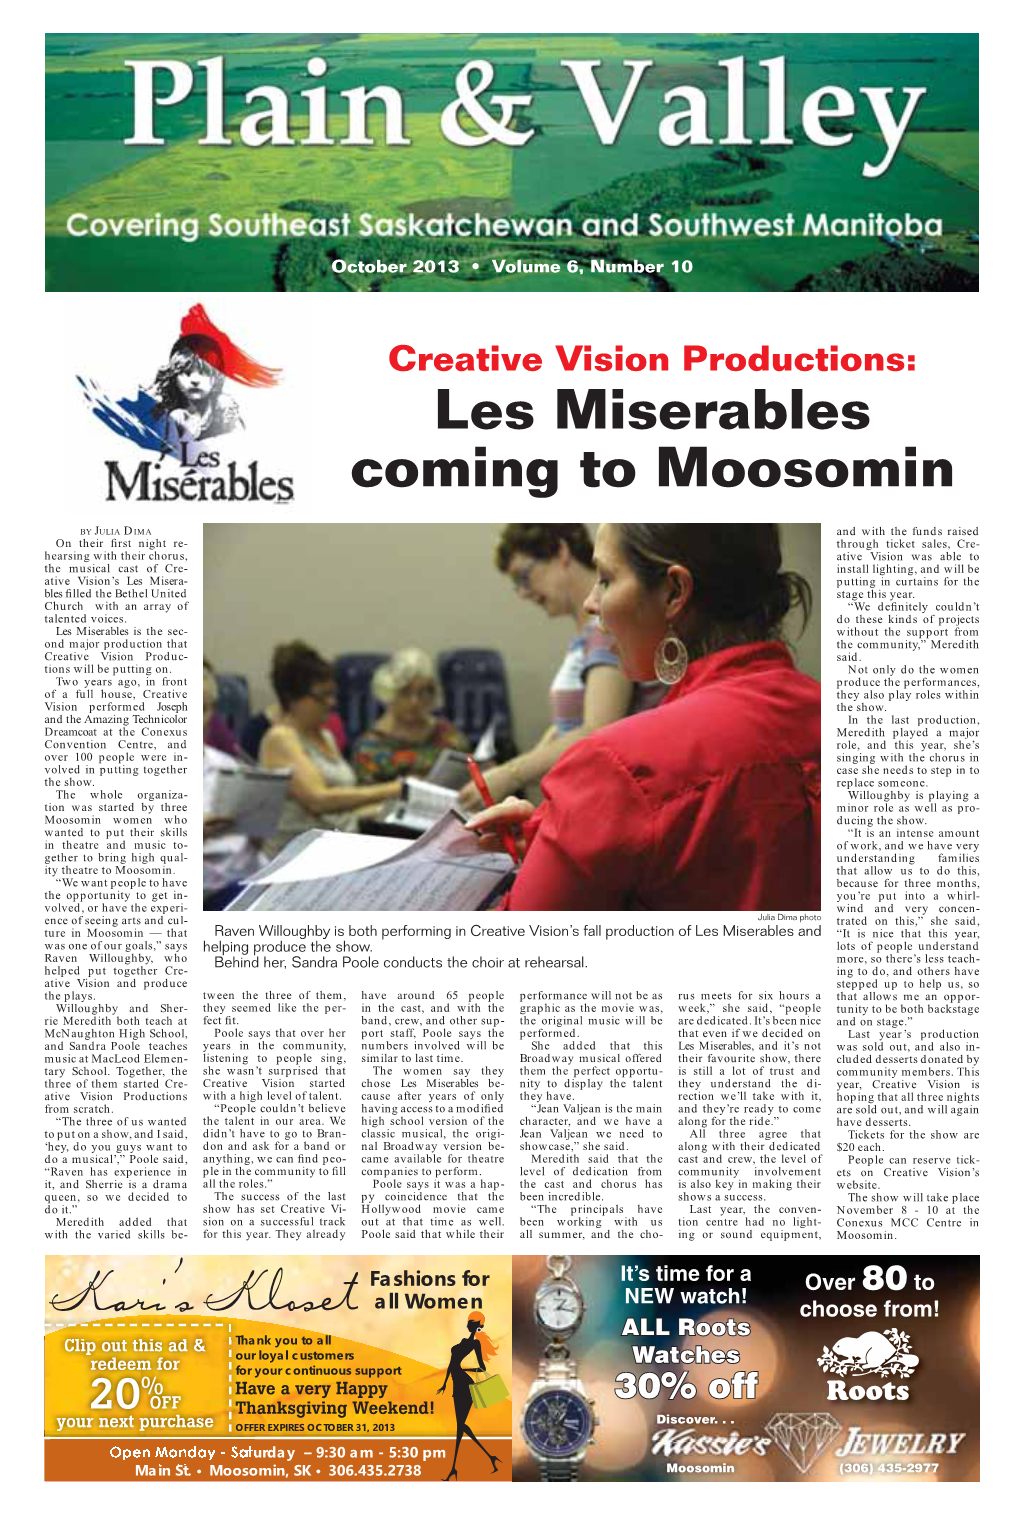 Les Miserables Coming to Moosomin